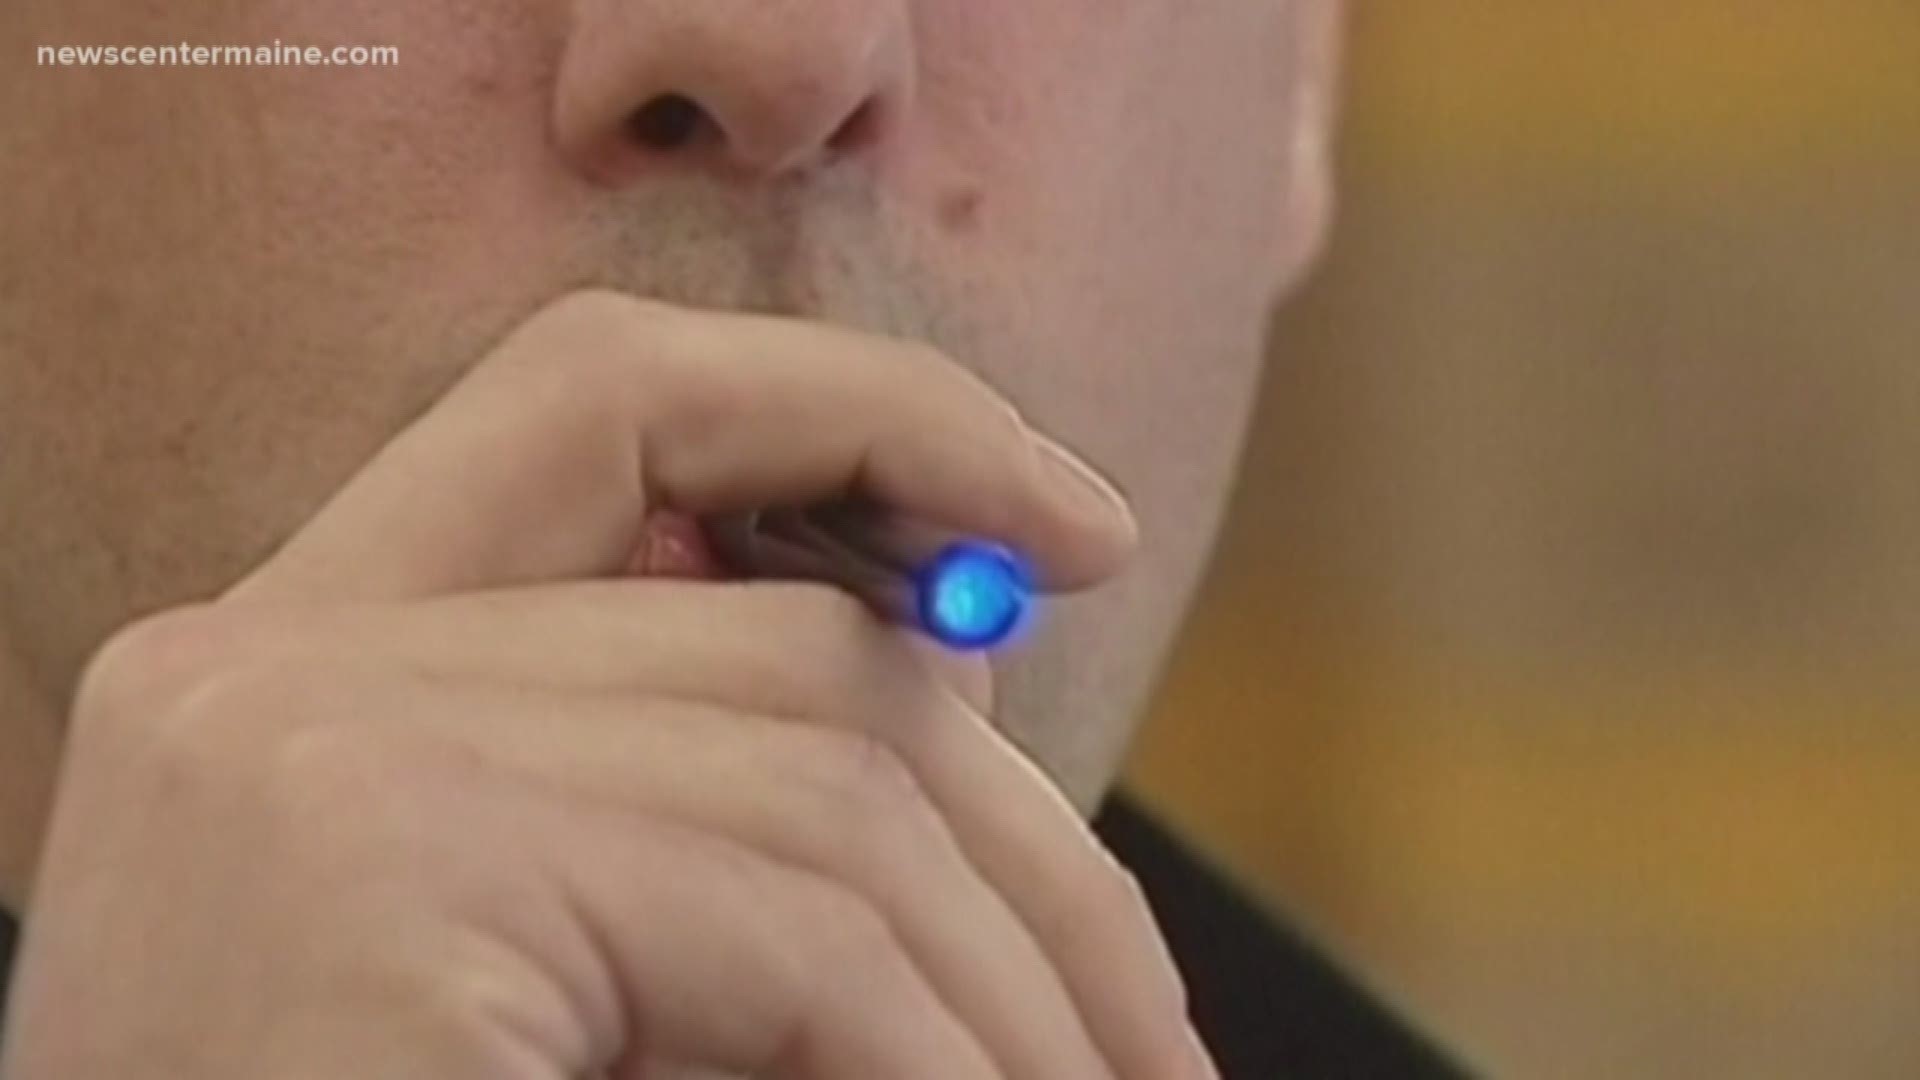 The Legislature approved a bill Friday to ban e-cigarettes in schools across the state.